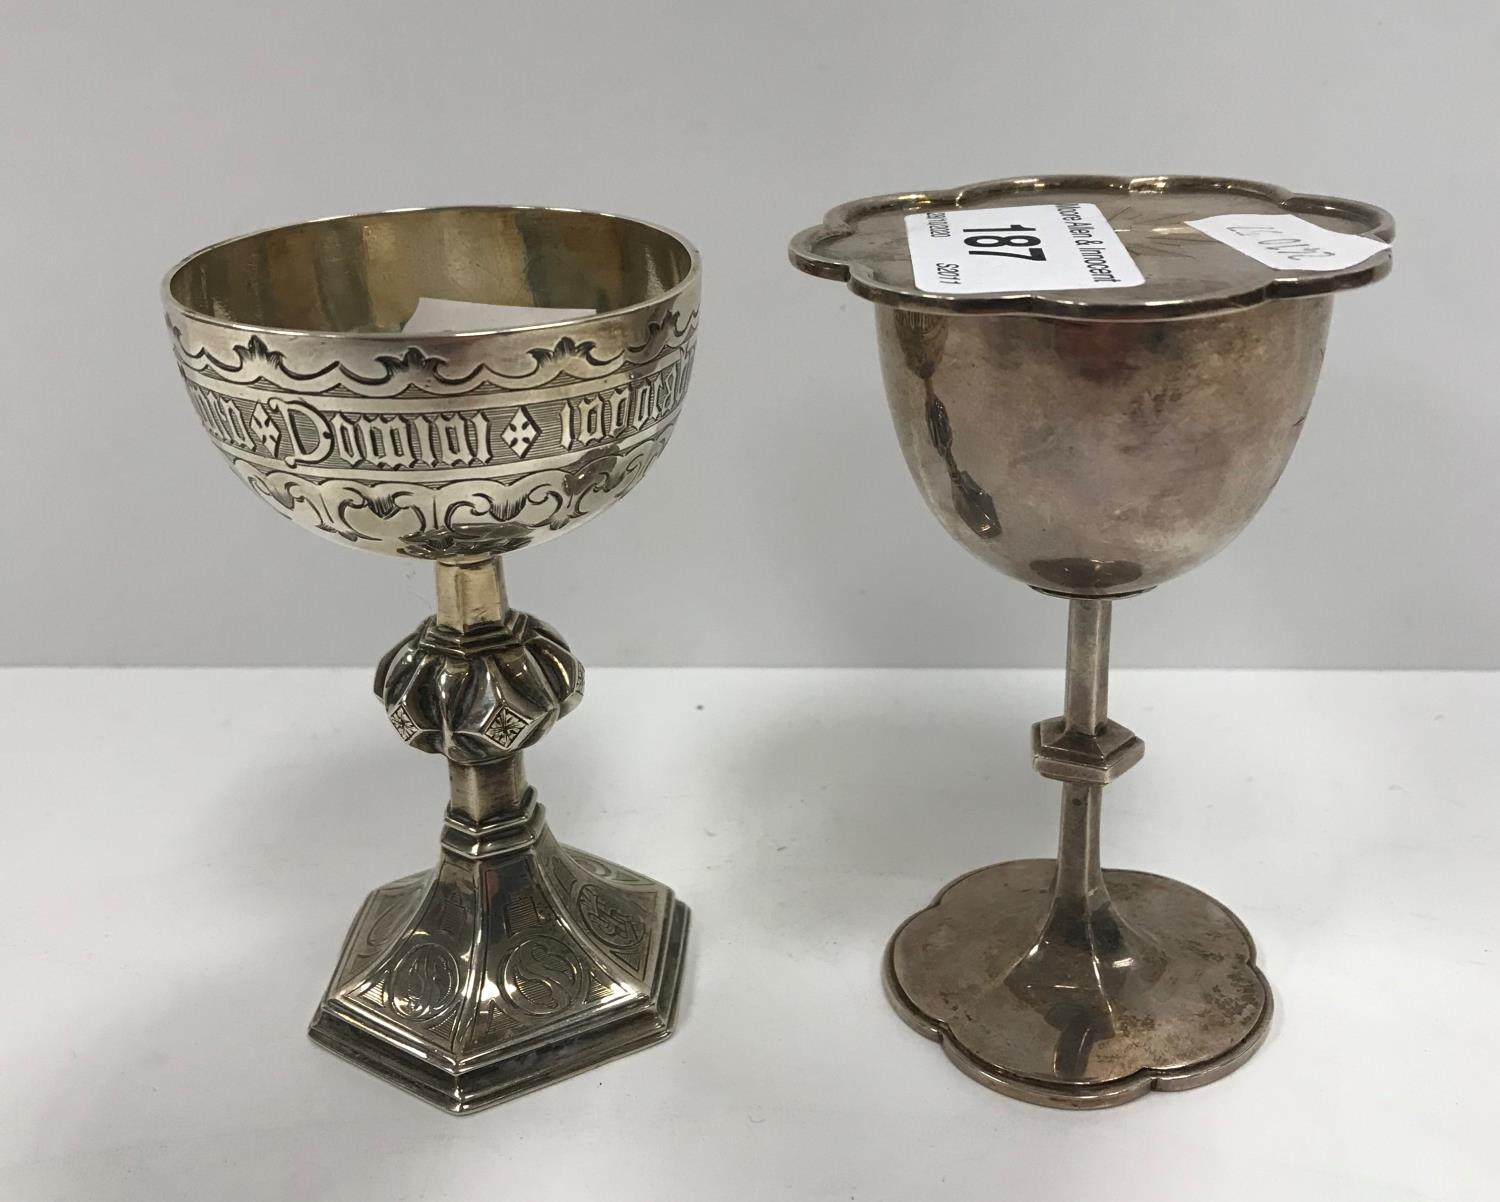 A Victorian silver travelling Communion chalice and paten (by Charles Reily and George Storer ,